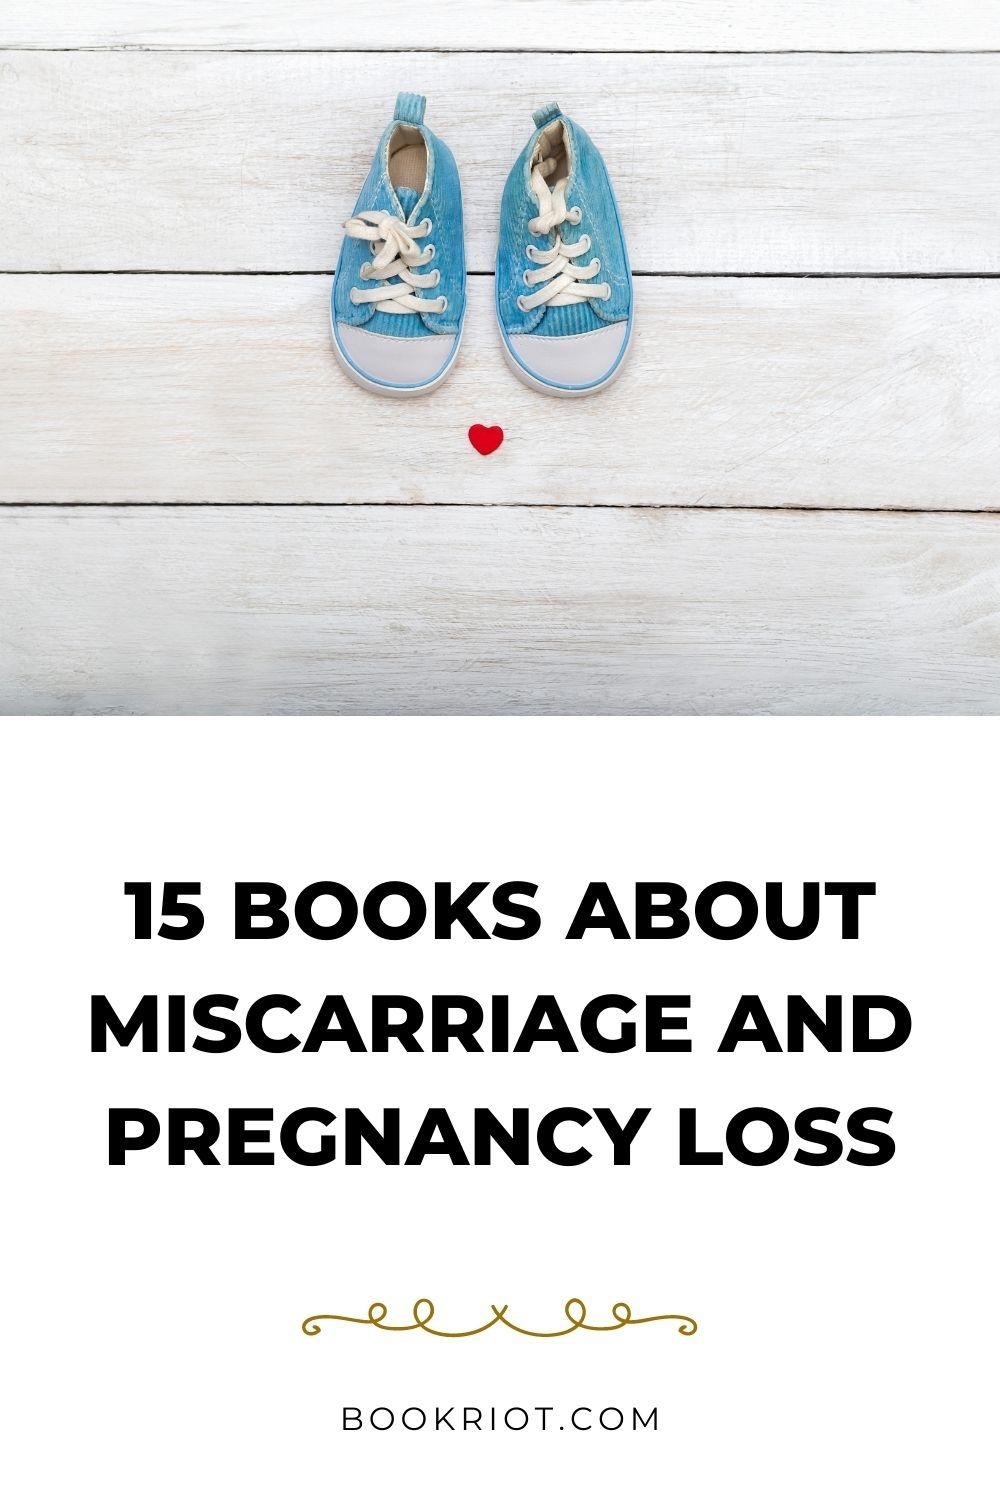 15 Books About Miscarriage And Pregnancy Loss Book Riot 